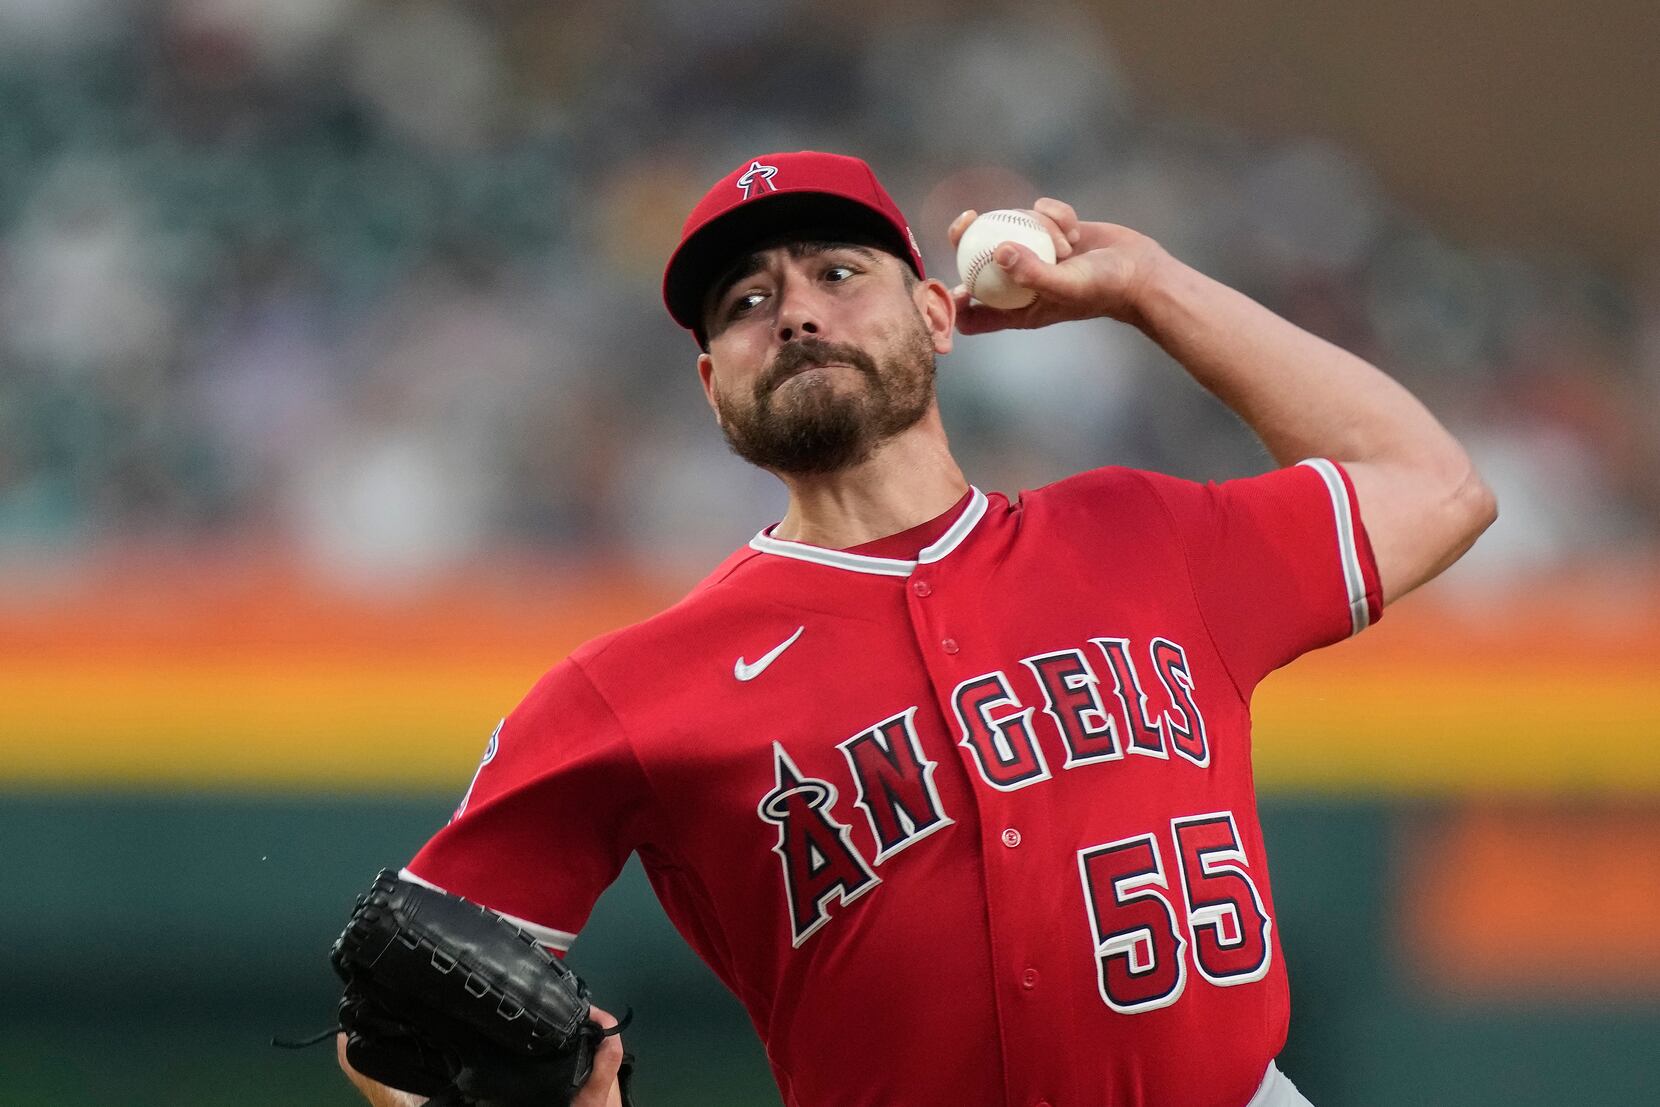 Passan] Breaking trade news: The Los Angeles Angels are in